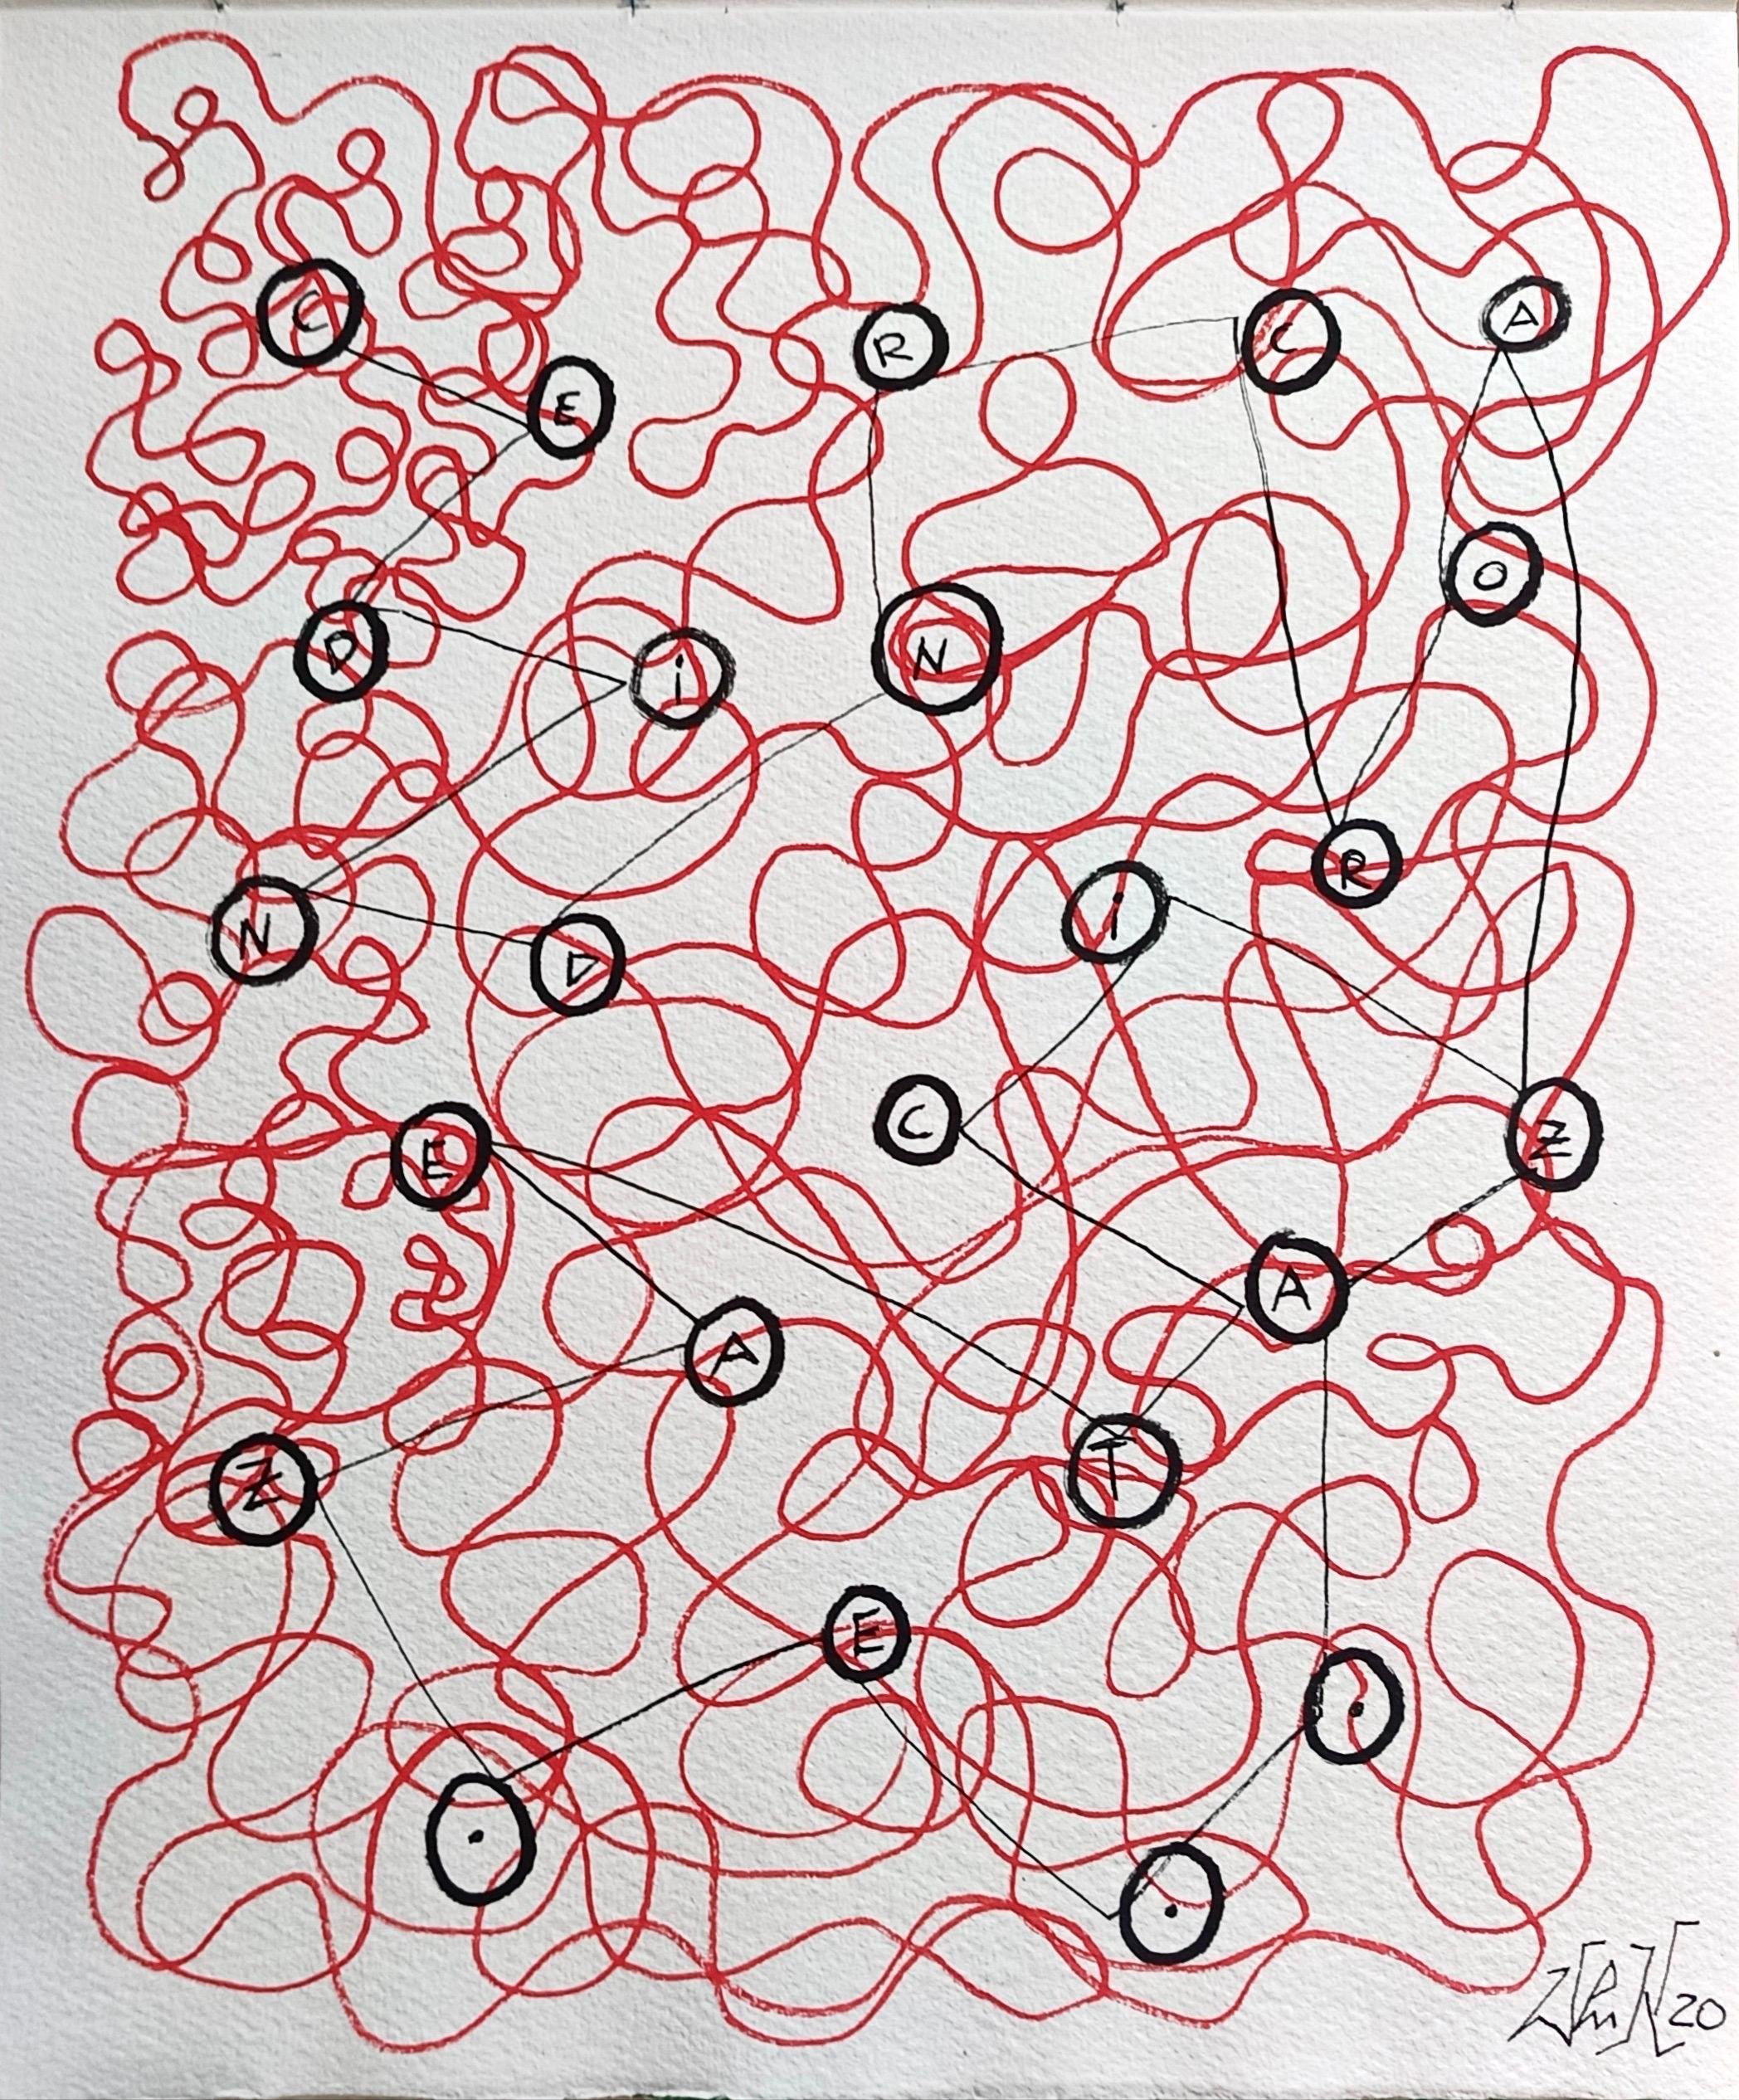 "Traces" by E. Wenk, 2020-Black and Red Acrylic Paint and Pencil, Abstract Words